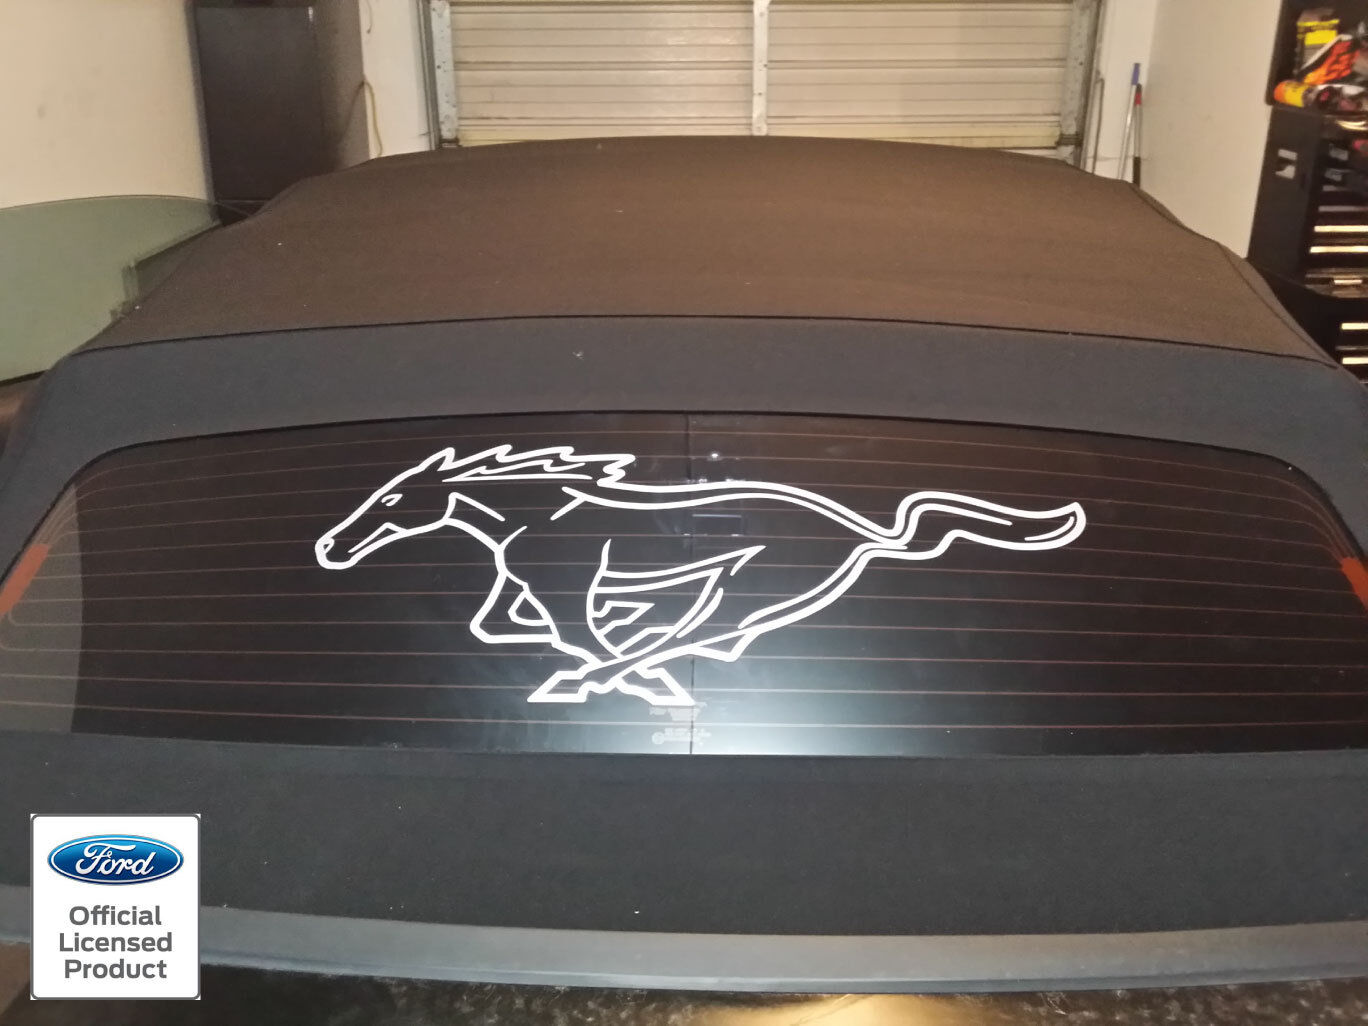 FORD MUSTANG REAR WINDOW PONY OUTLINE DECAL 94-98 99-04 05-09 2010-2014 GRAPHICS